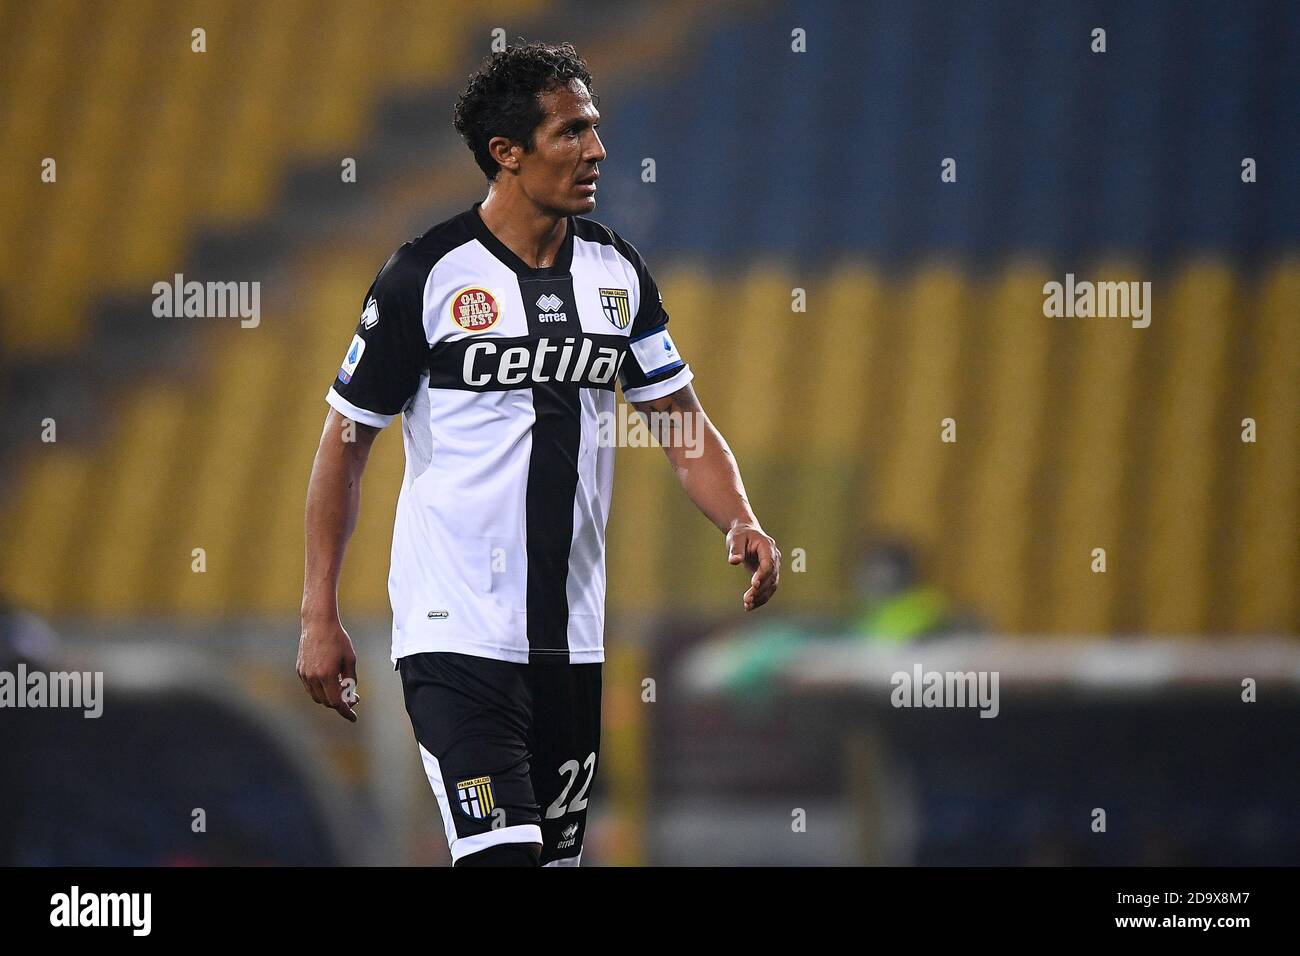 Parma, Italy - 07 November, 2020: Bruno Alves of Parma Calcio looks on during the Serie A football match between Parma Calcio and ACF Fiorentina. The match ended 0-0 tie. Credit: Nicolò Campo/Alamy Live News Stock Photo